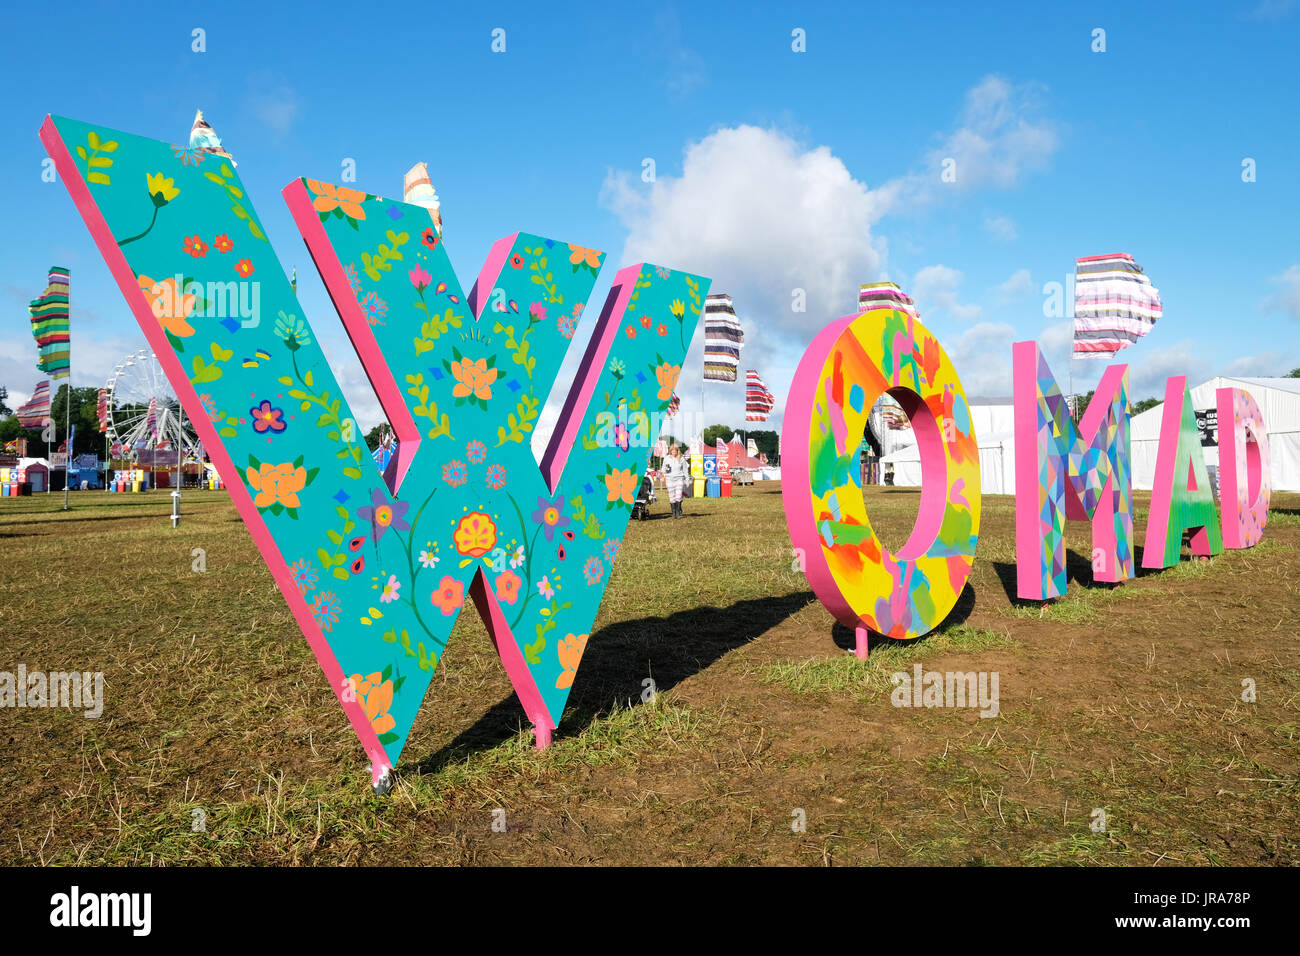 WOMAD multicolores signe, Festival Womad, Charlton Park, Malmesbury, Wiltshire, Angleterre, Juillet 30, 2017 Banque D'Images